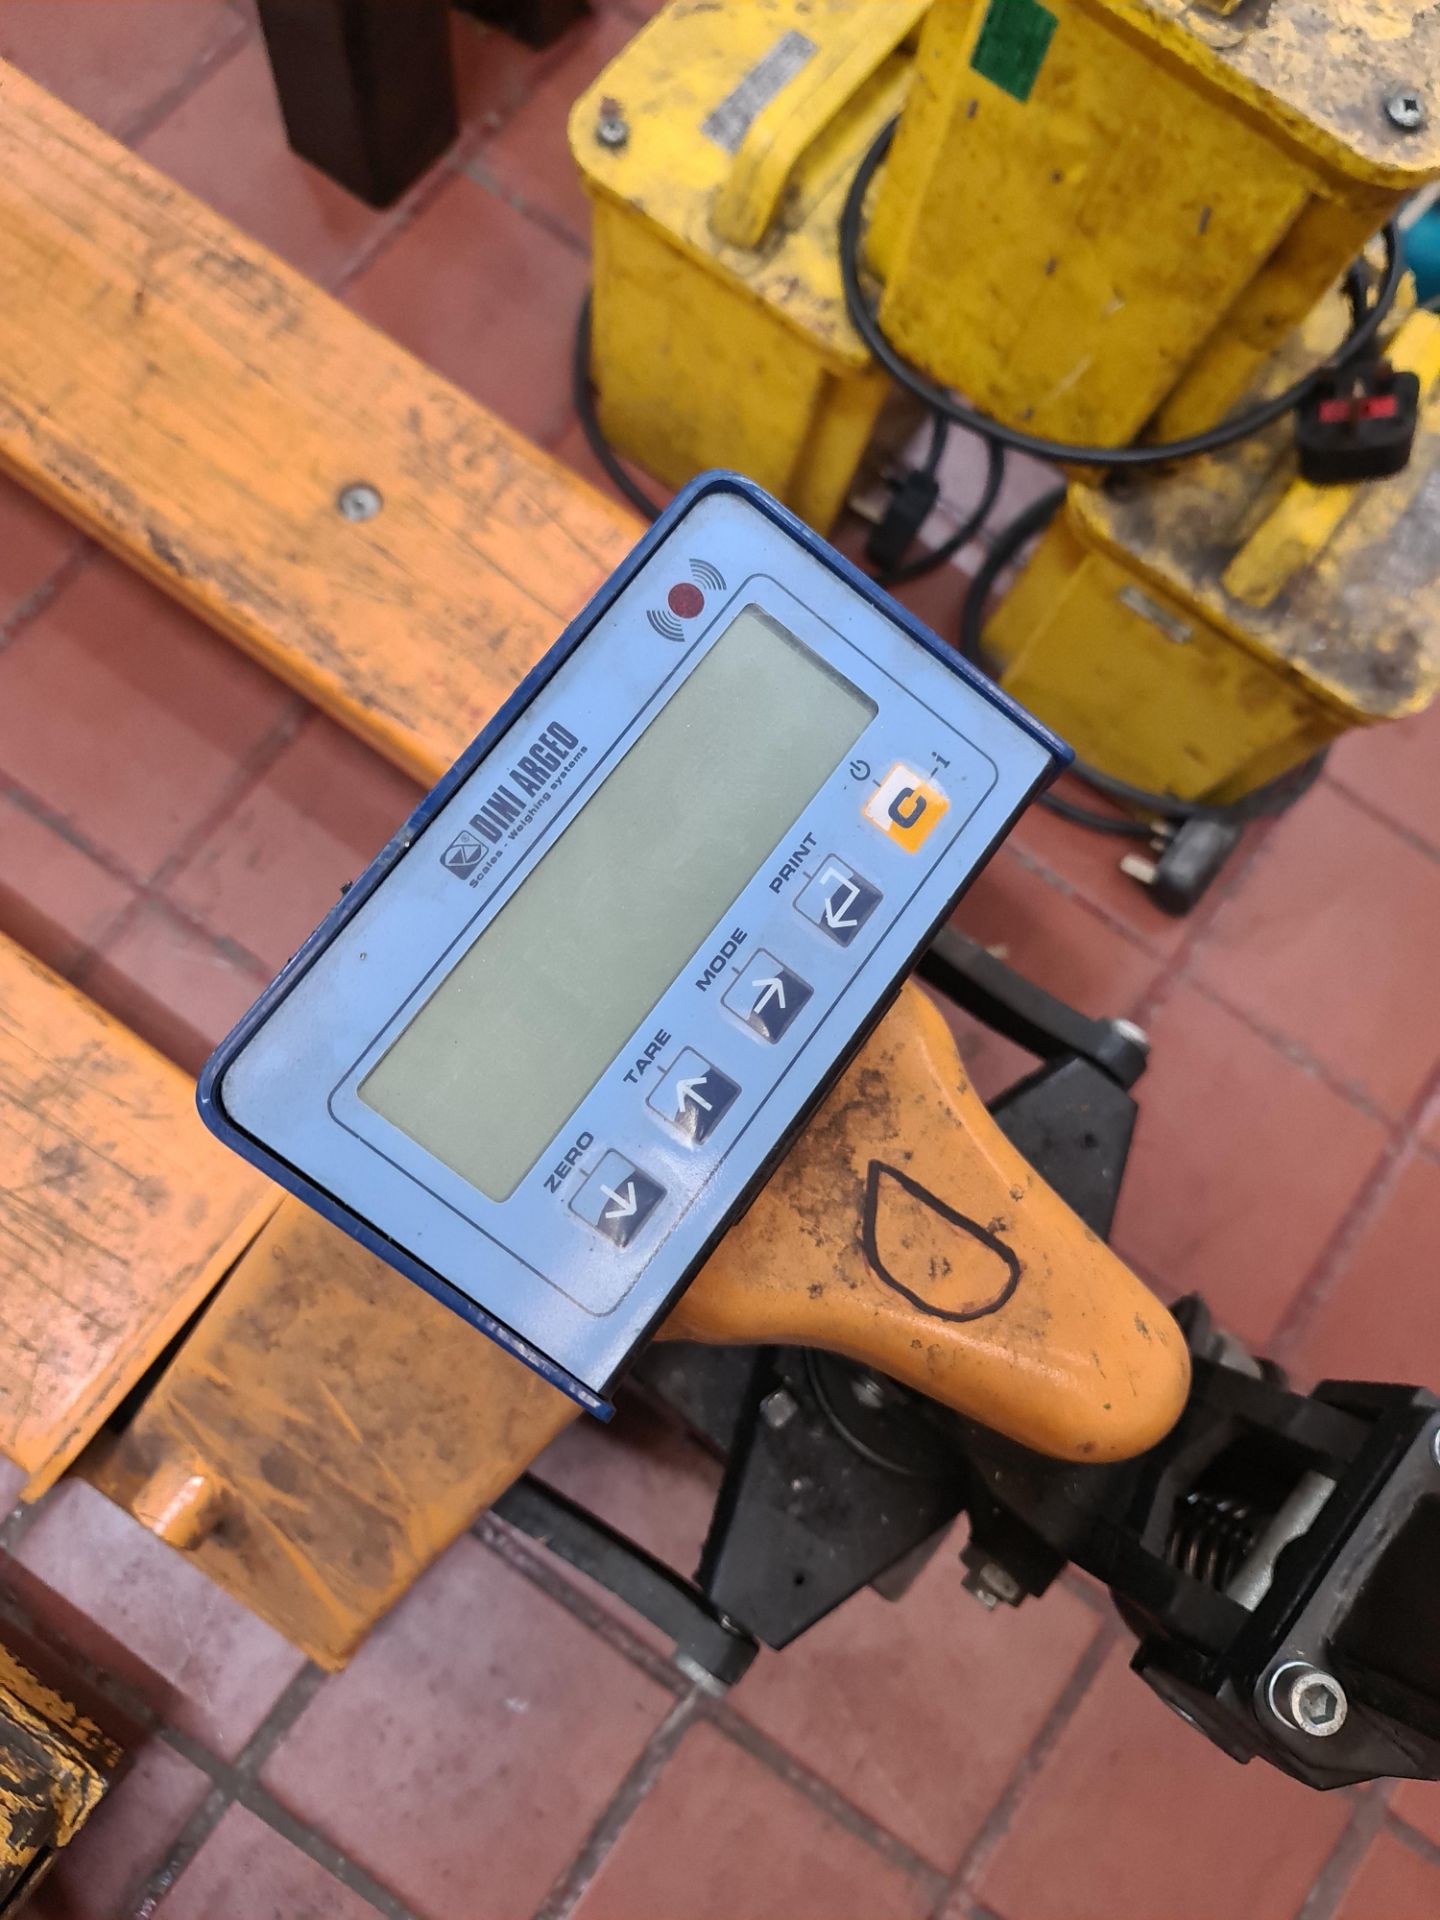 Euro pallet truck with built-in digital weighing system - Image 6 of 7